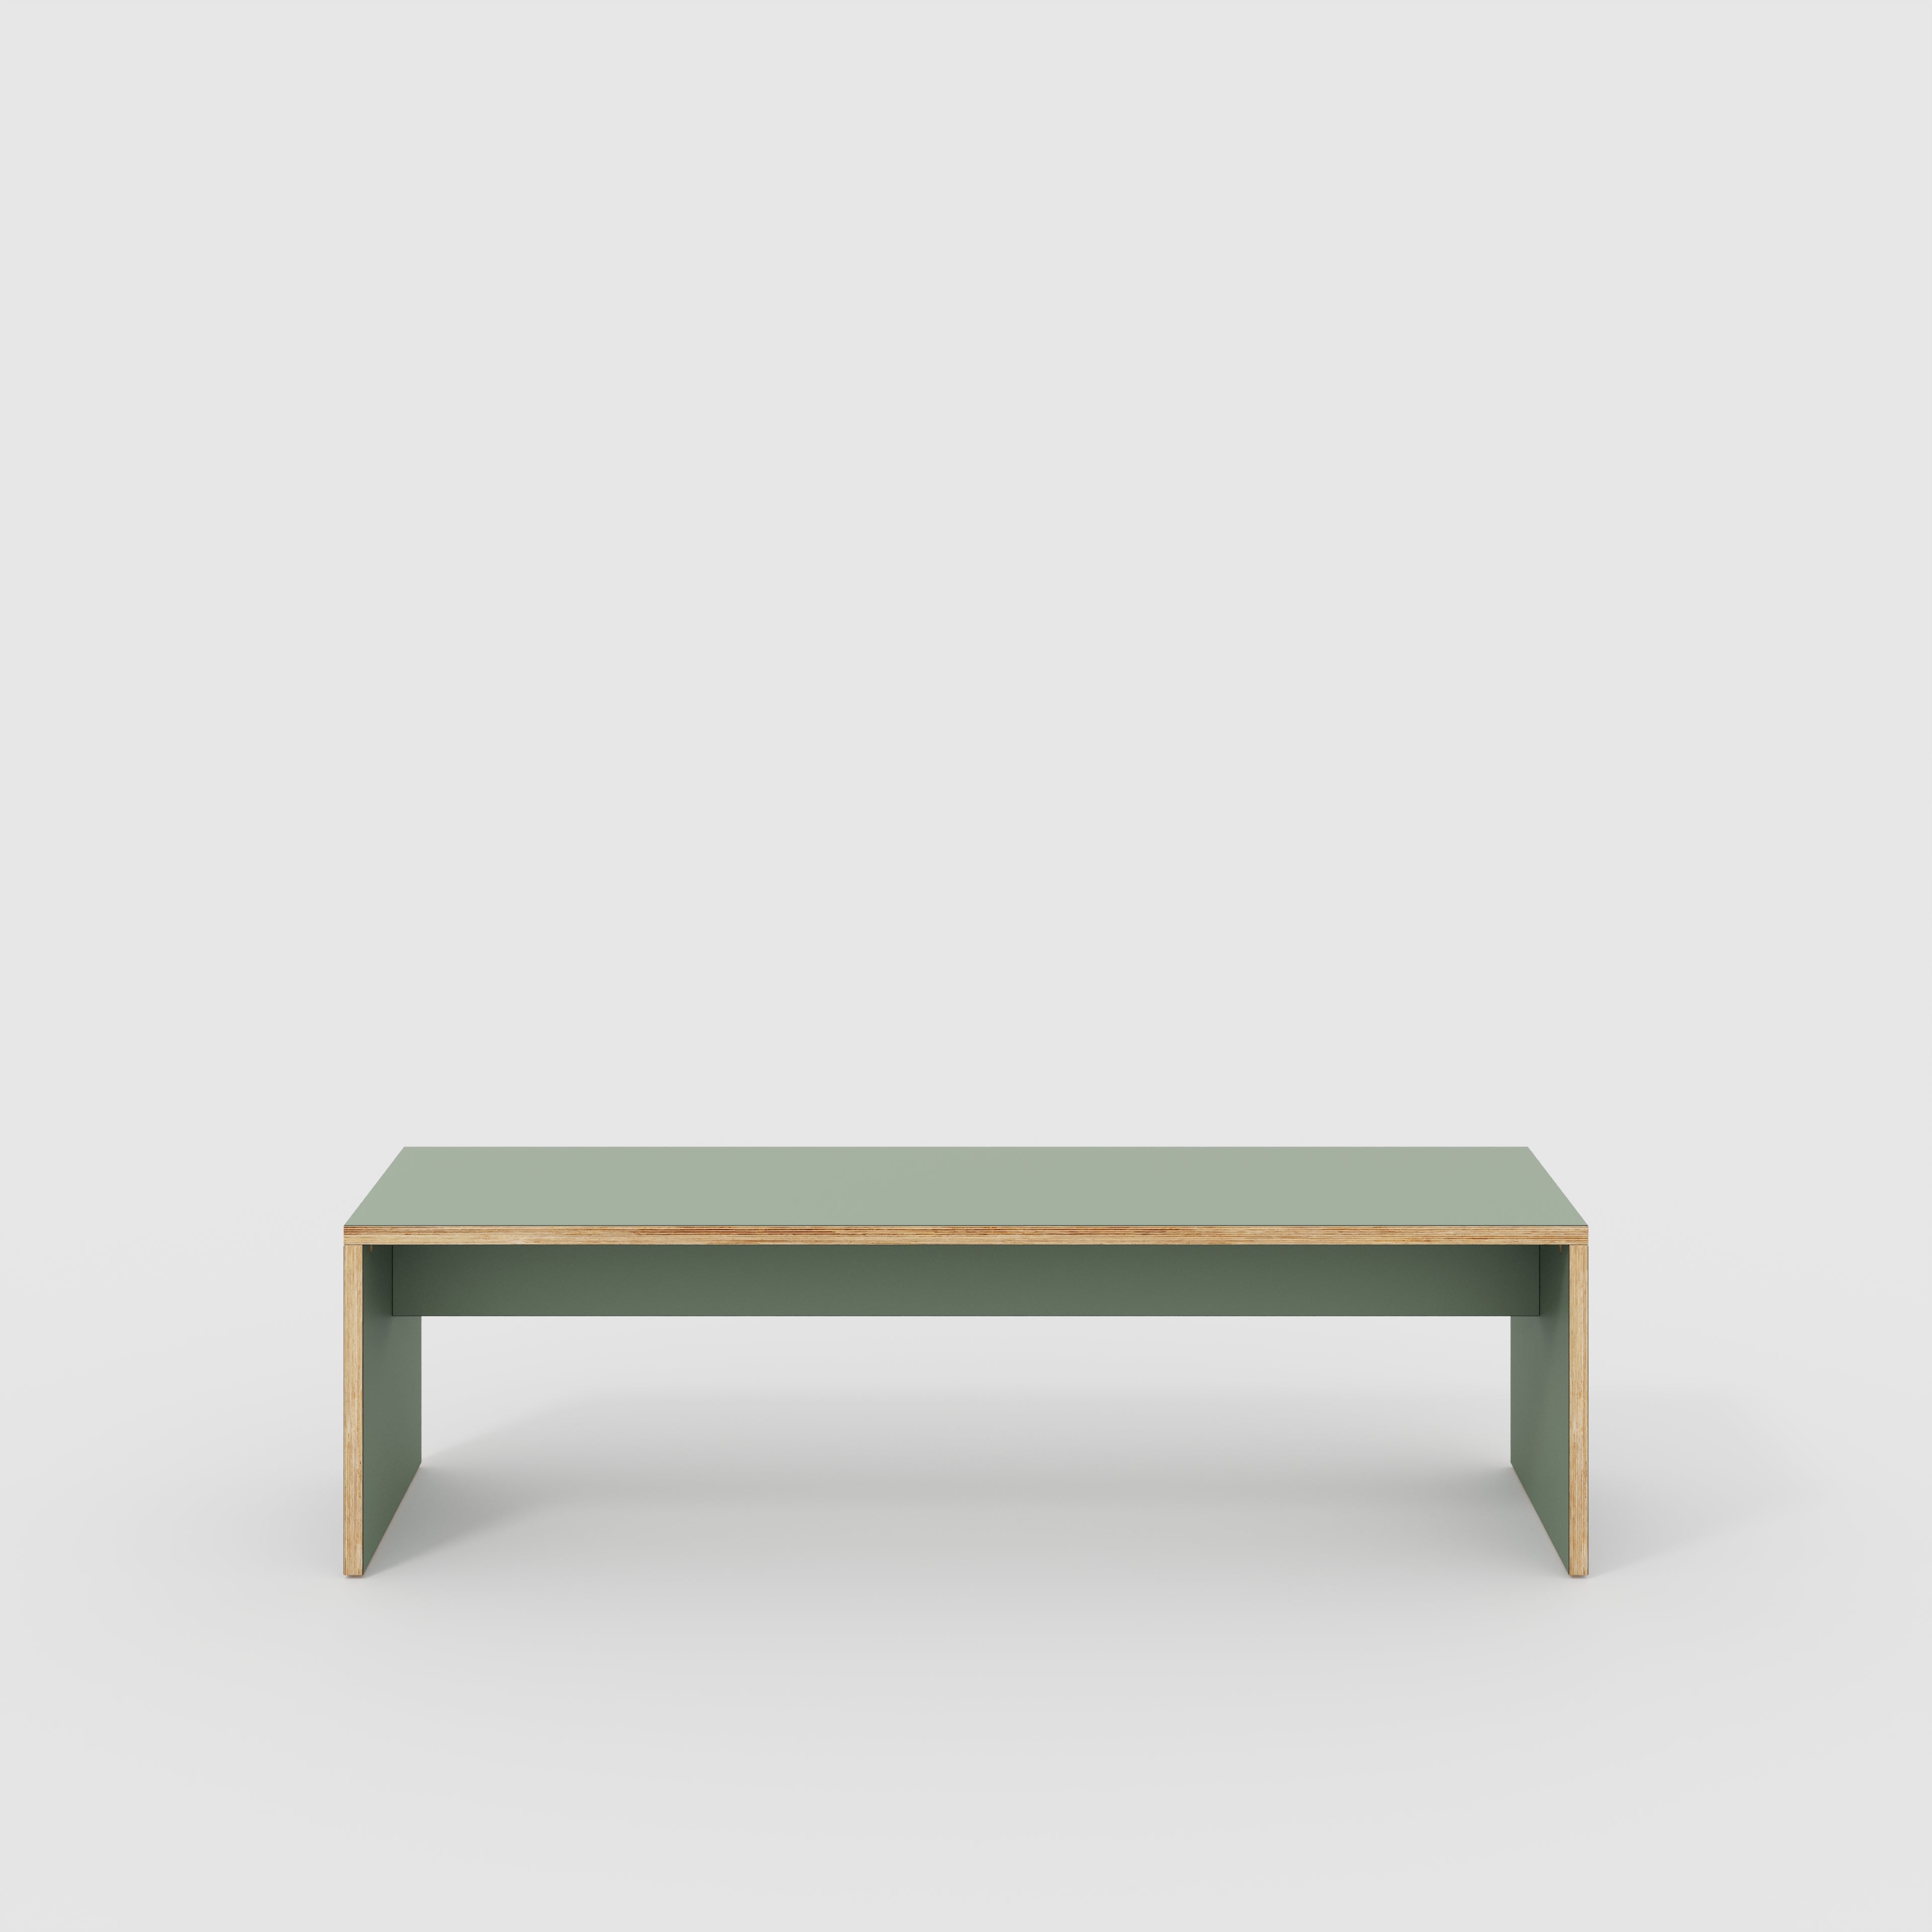 Bench Seat with Solid Sides - Formica Green Slate - 1600(w) x 400(d)